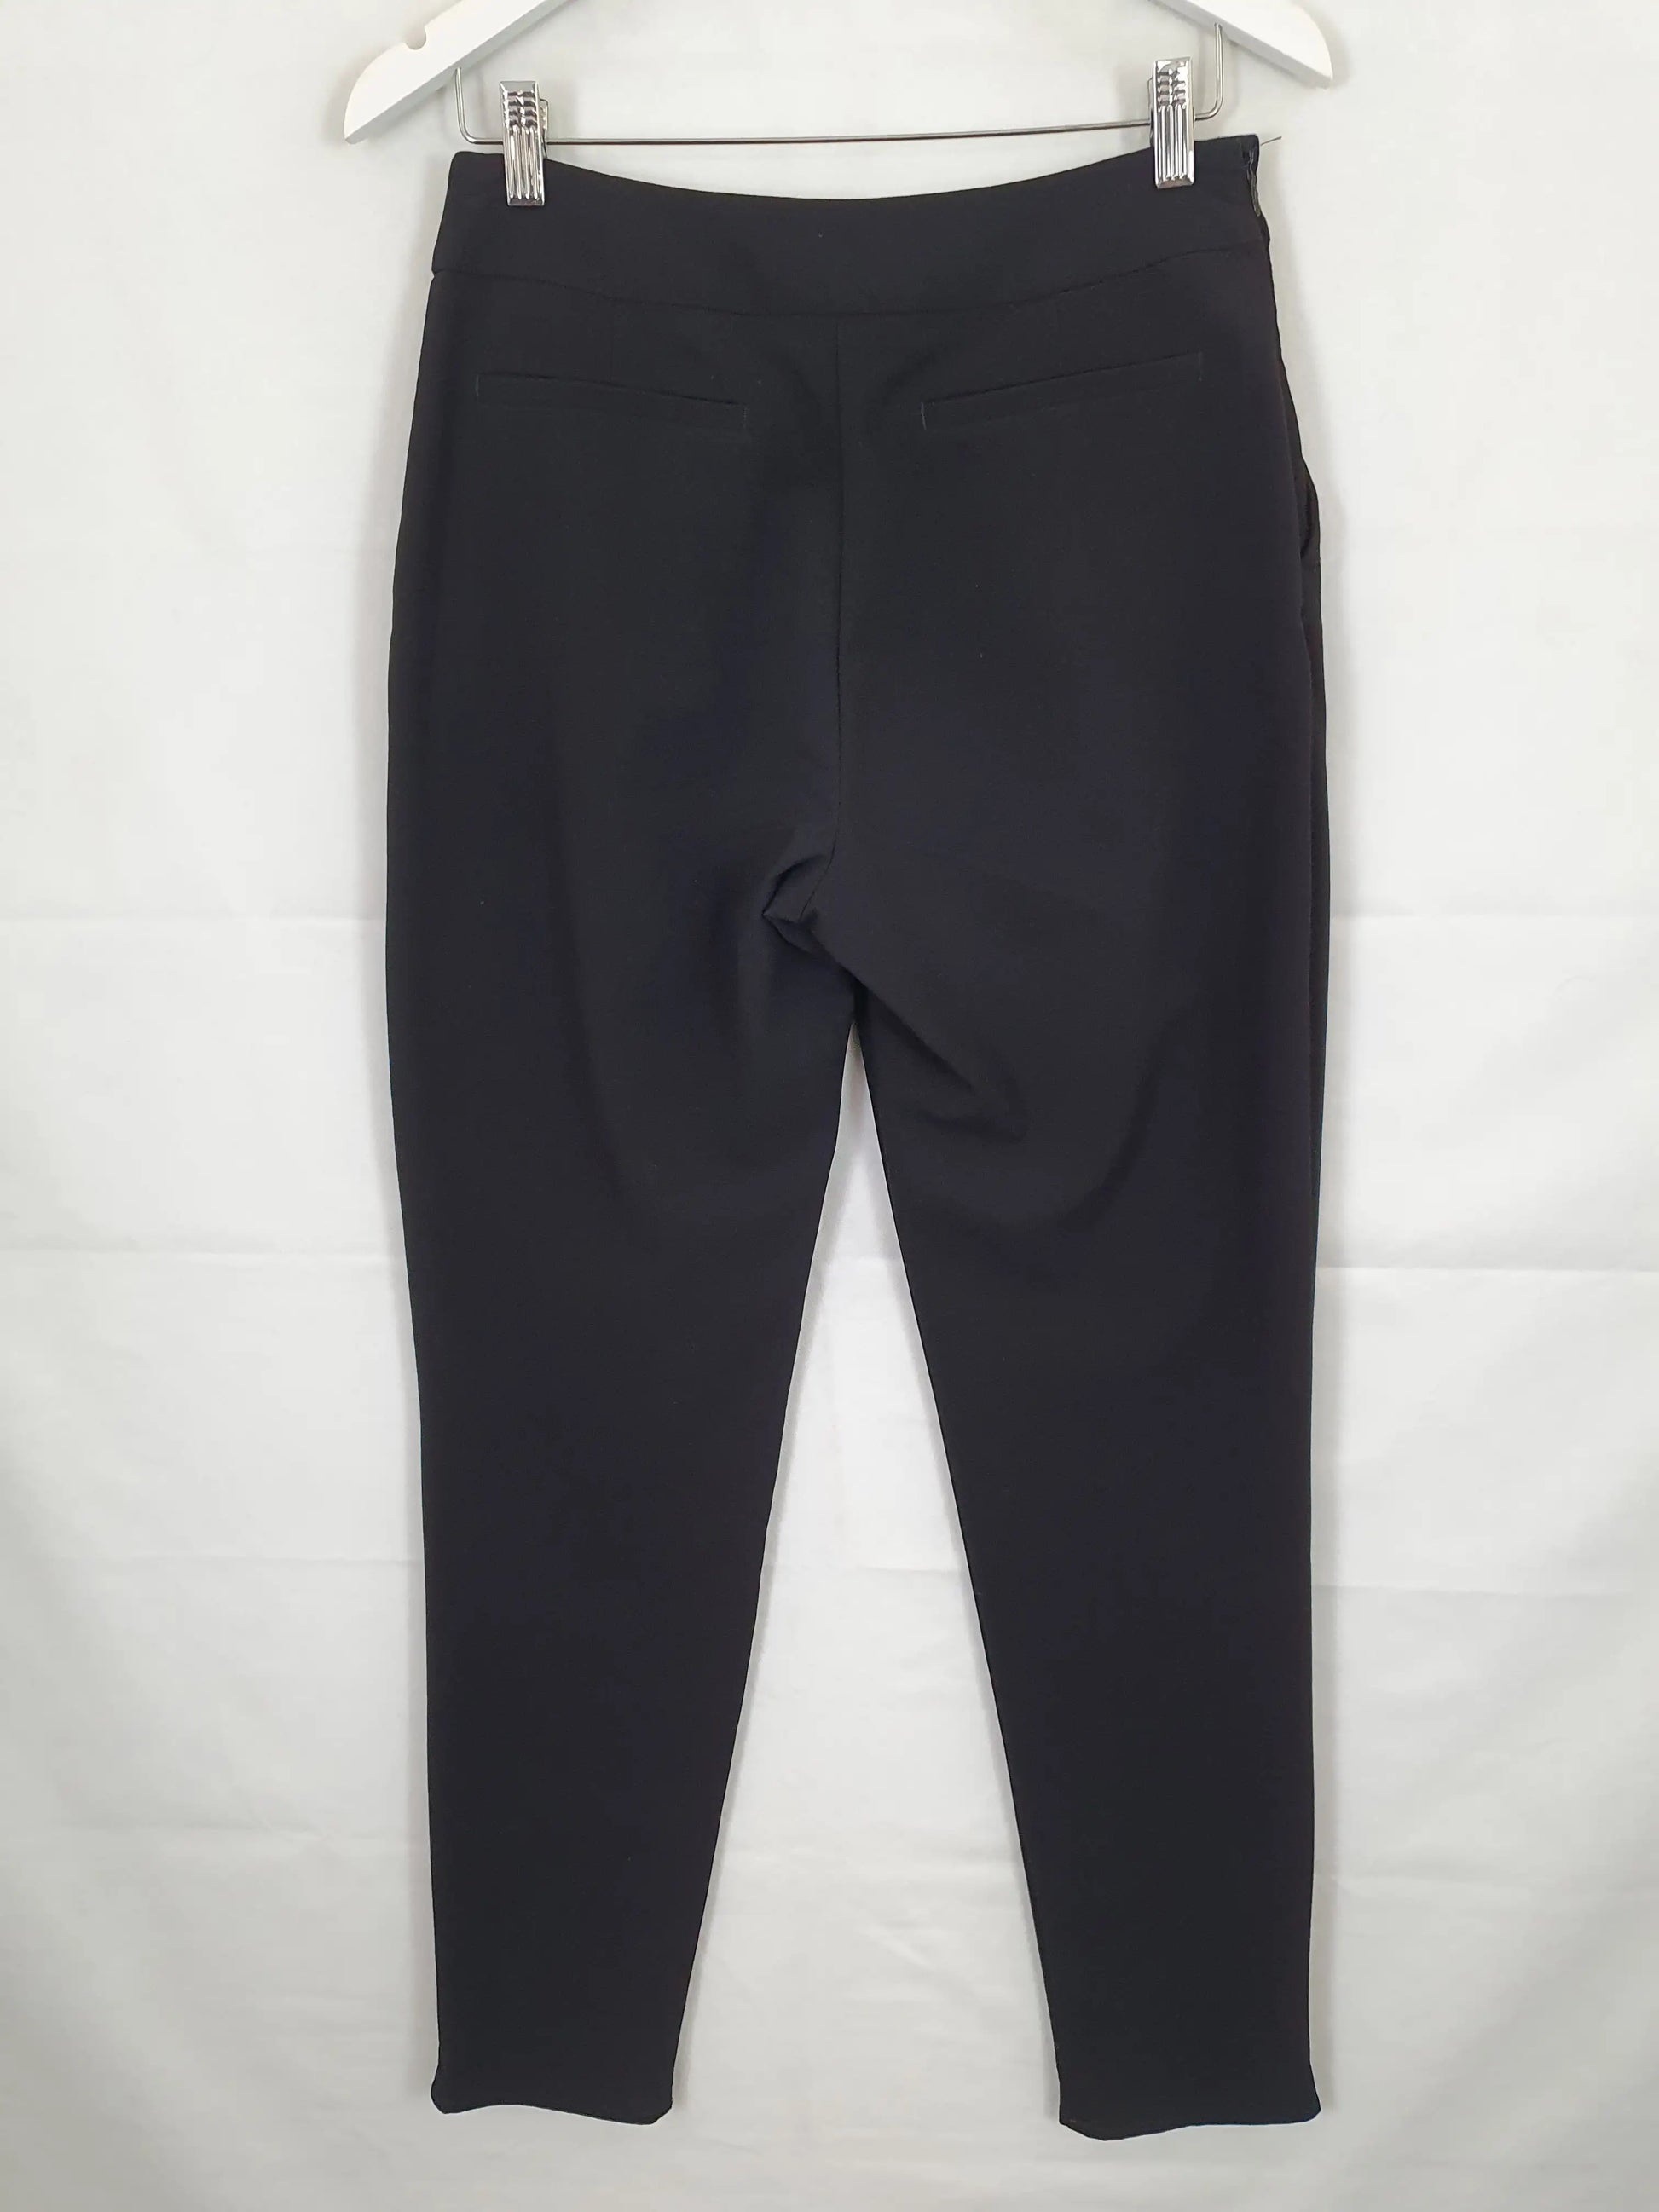 Shop for Size 8, Trousers, Fashion